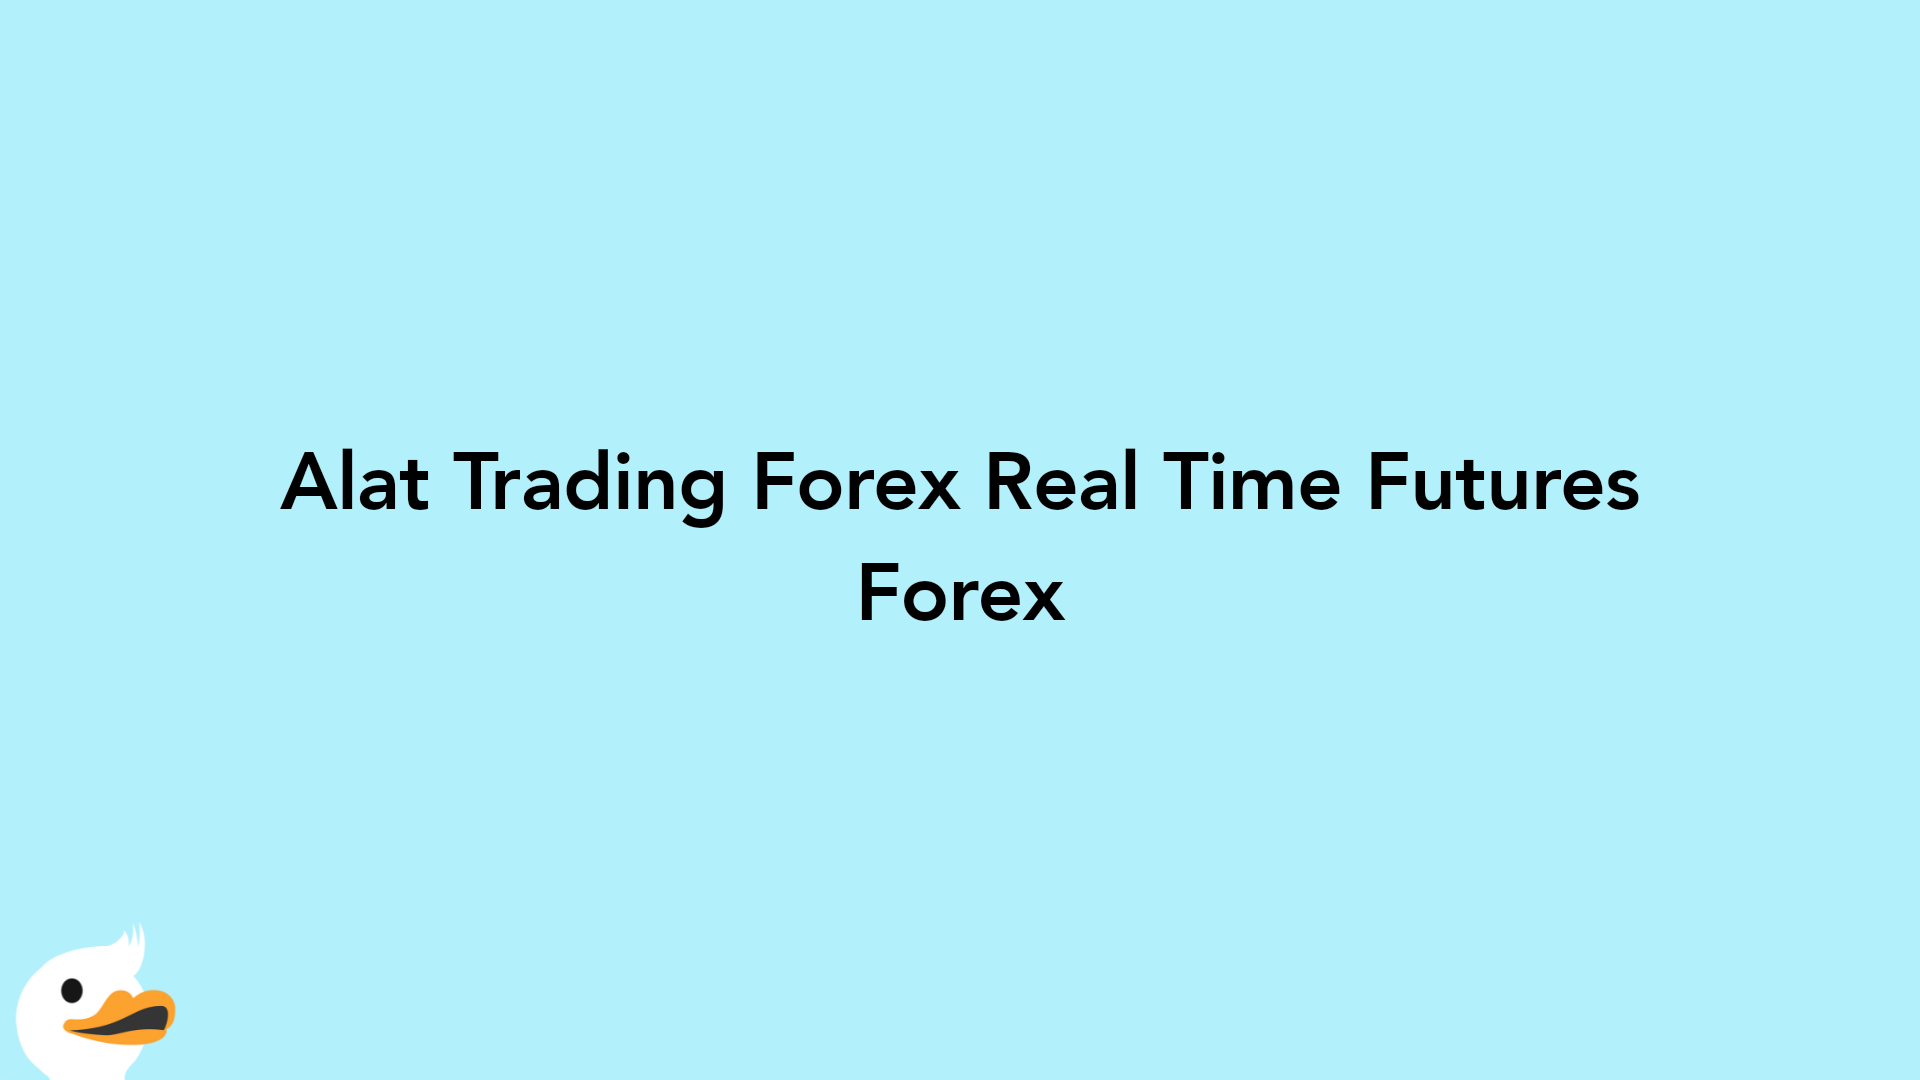 Alat Trading Forex Real Time Futures Forex